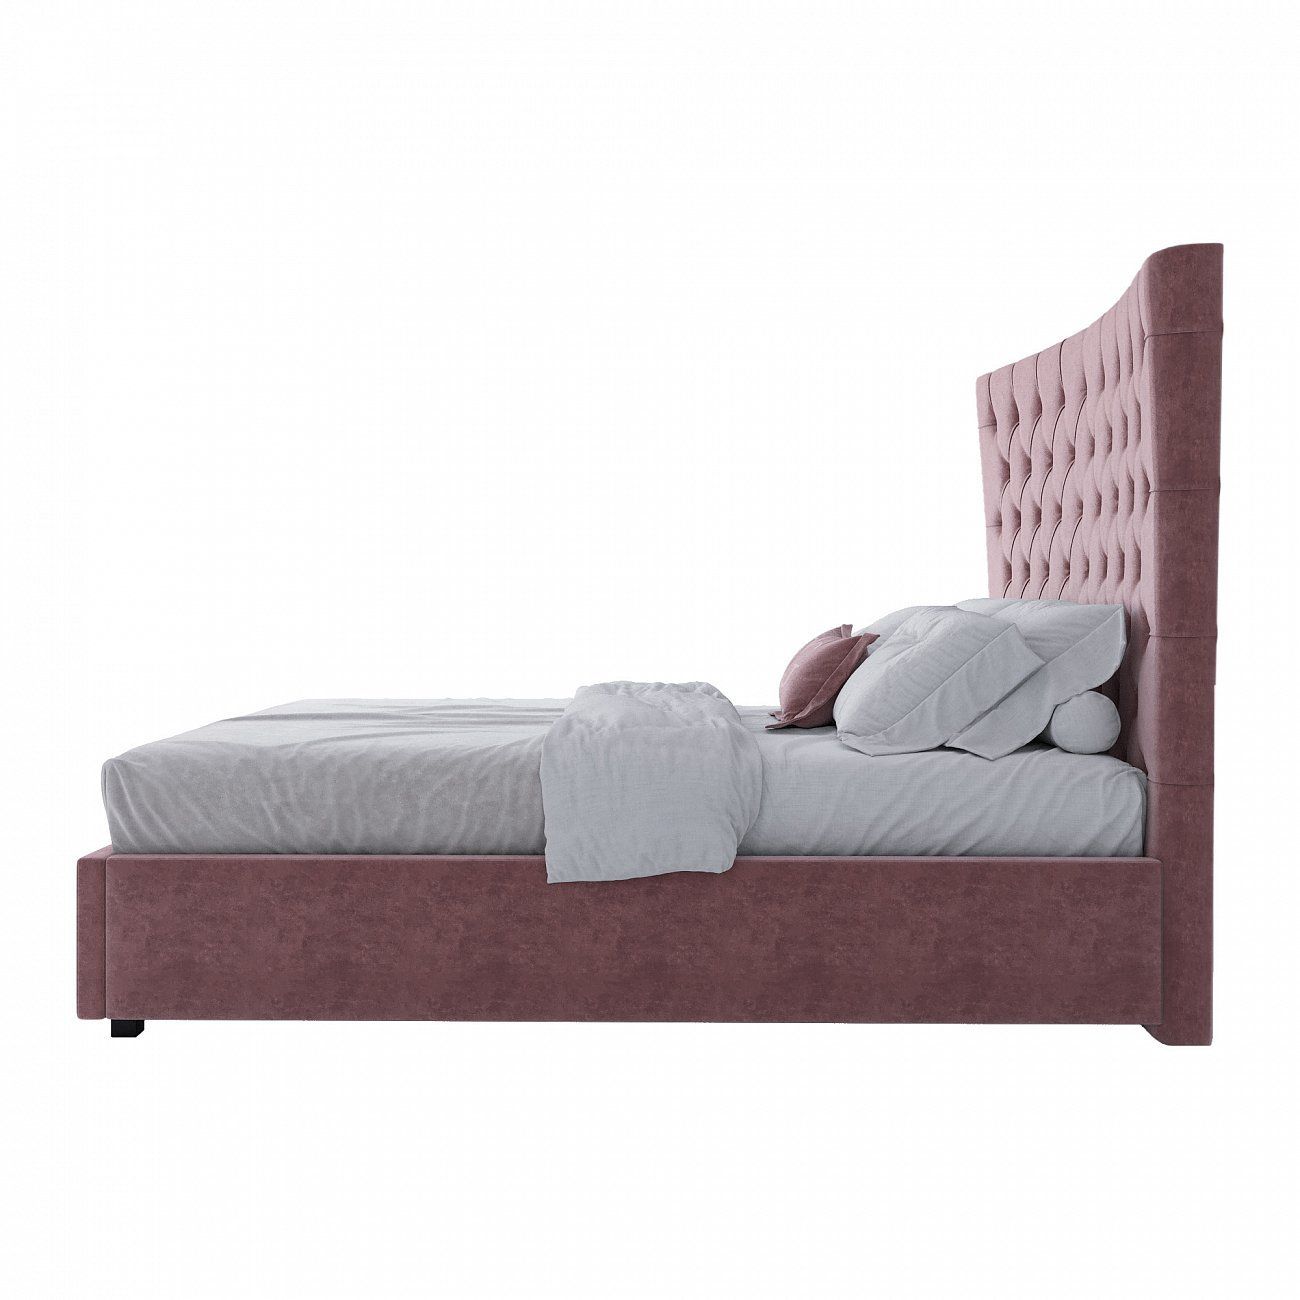 Semi-double teenage bed with a soft headboard 140x200 cm dusty rose QuickSand